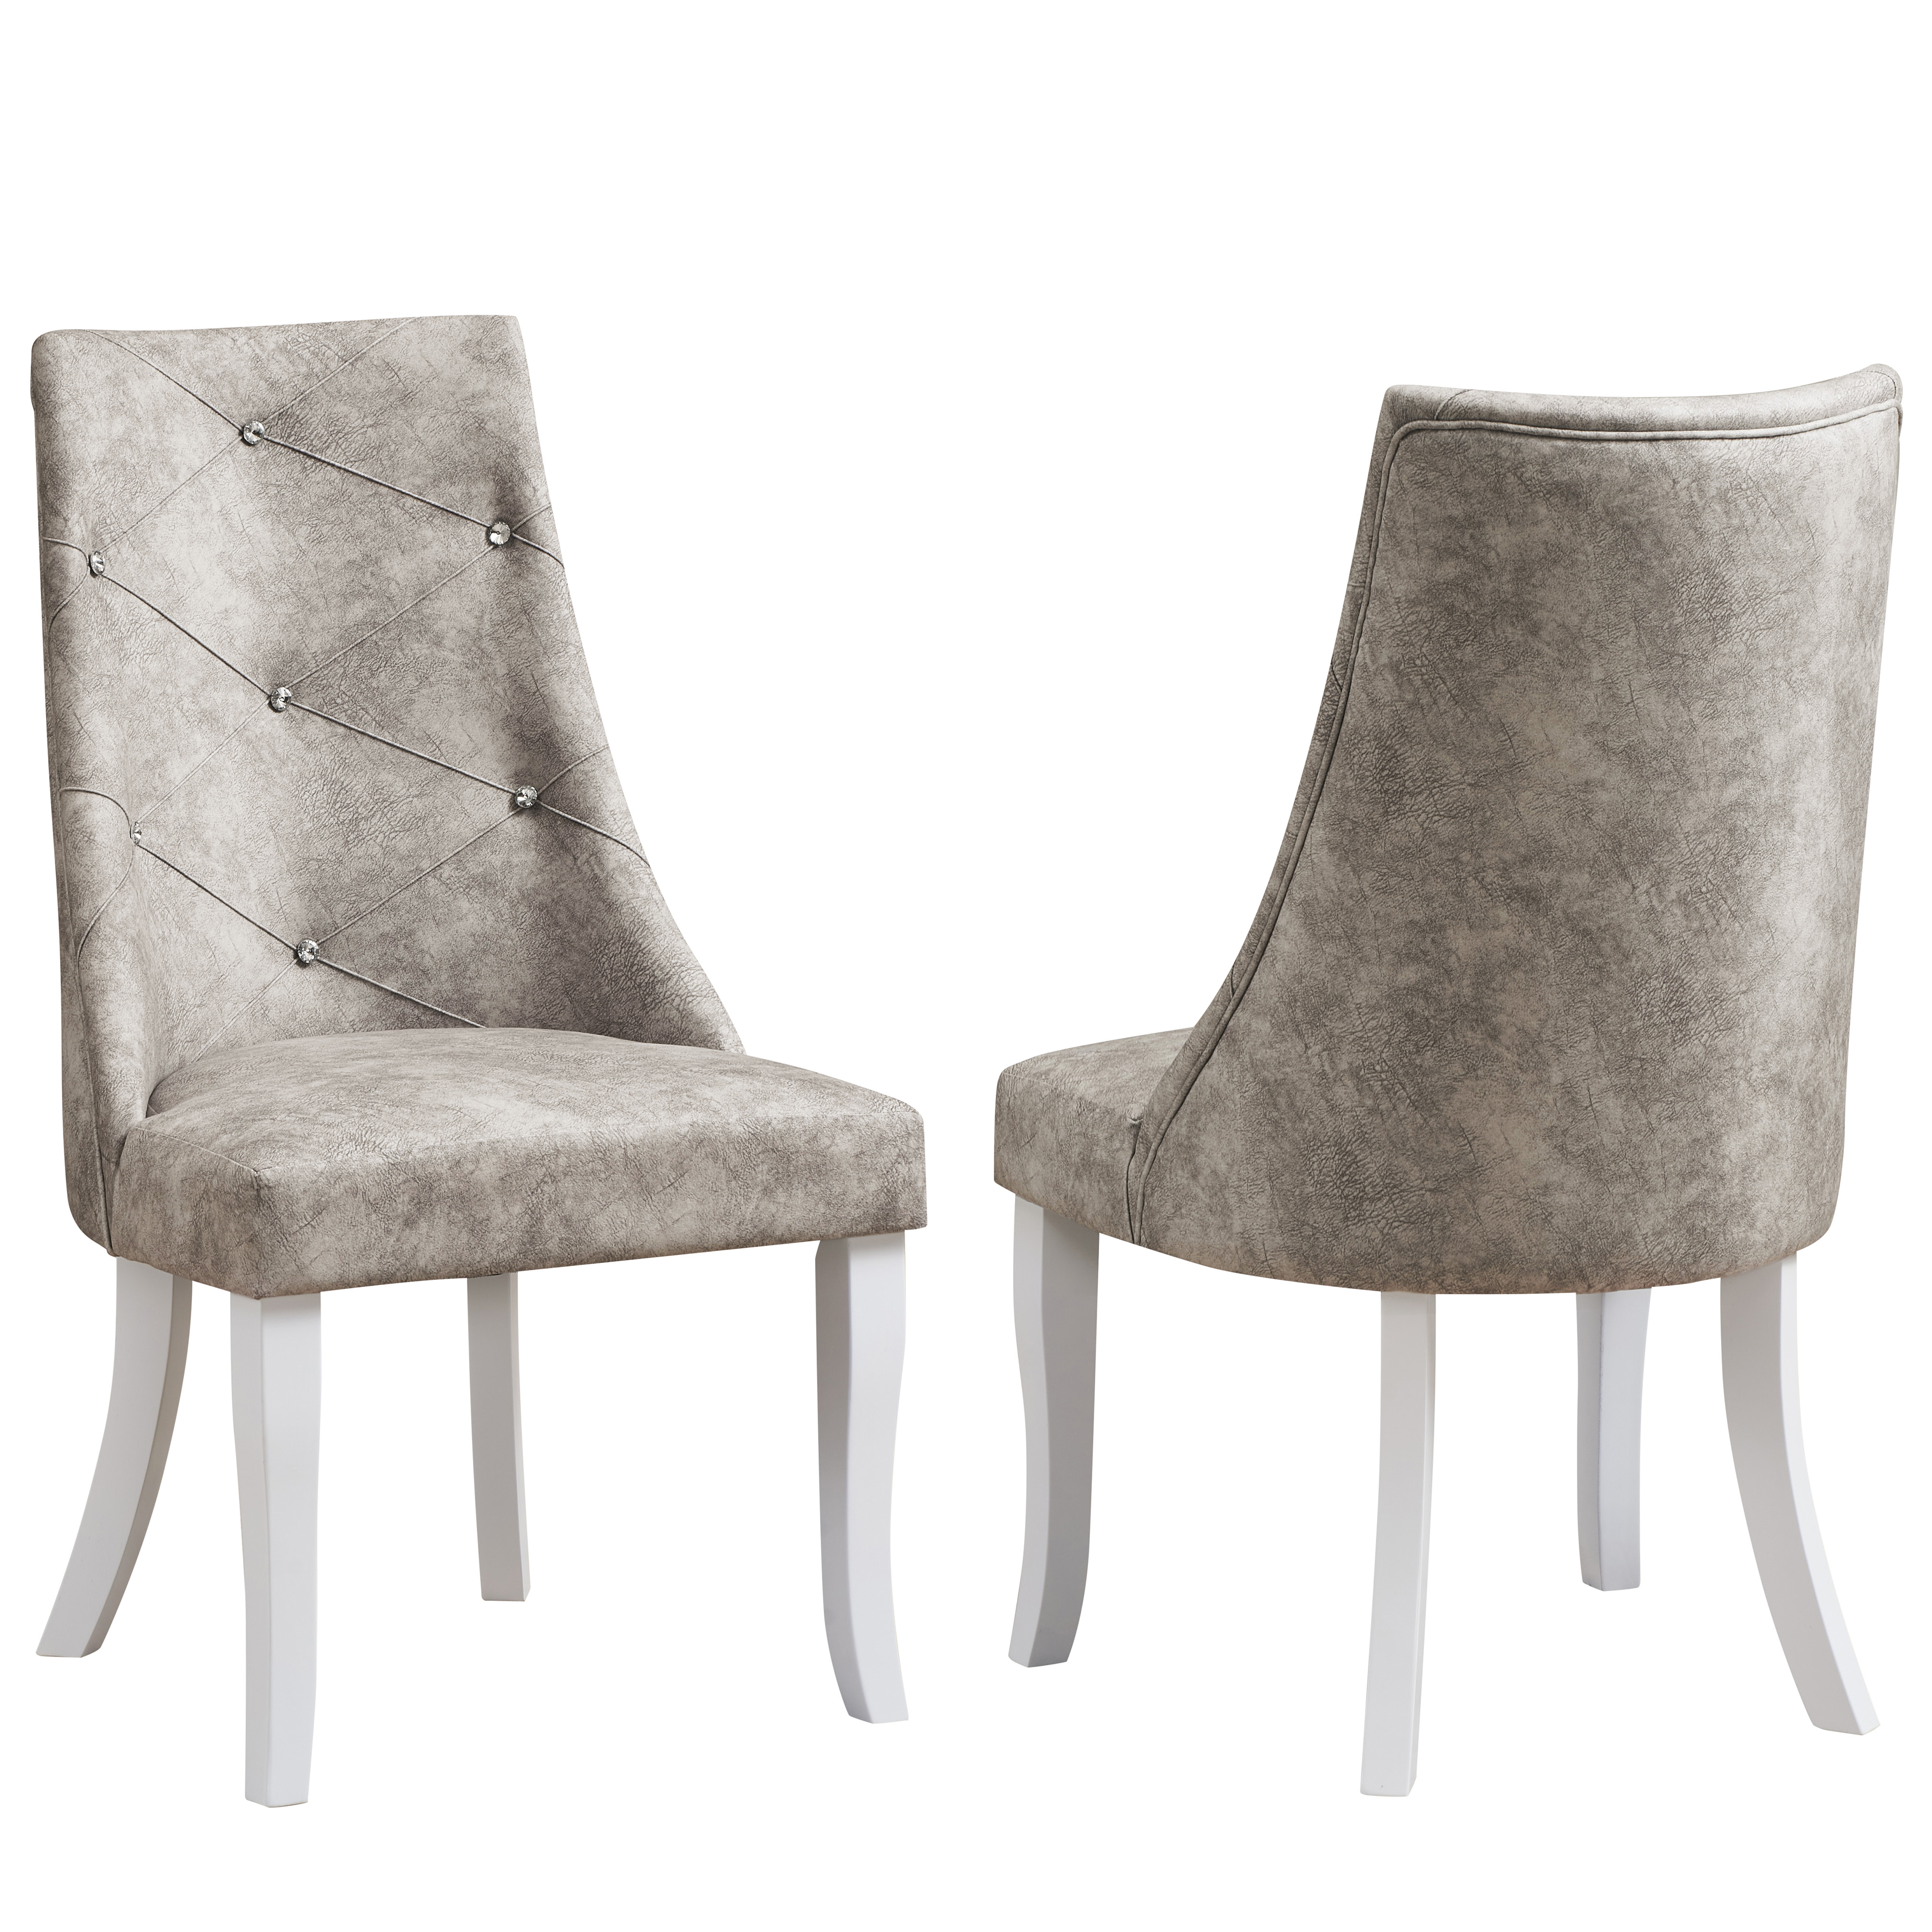 Skyrah Dining Chairs (Silver) - Set of 2